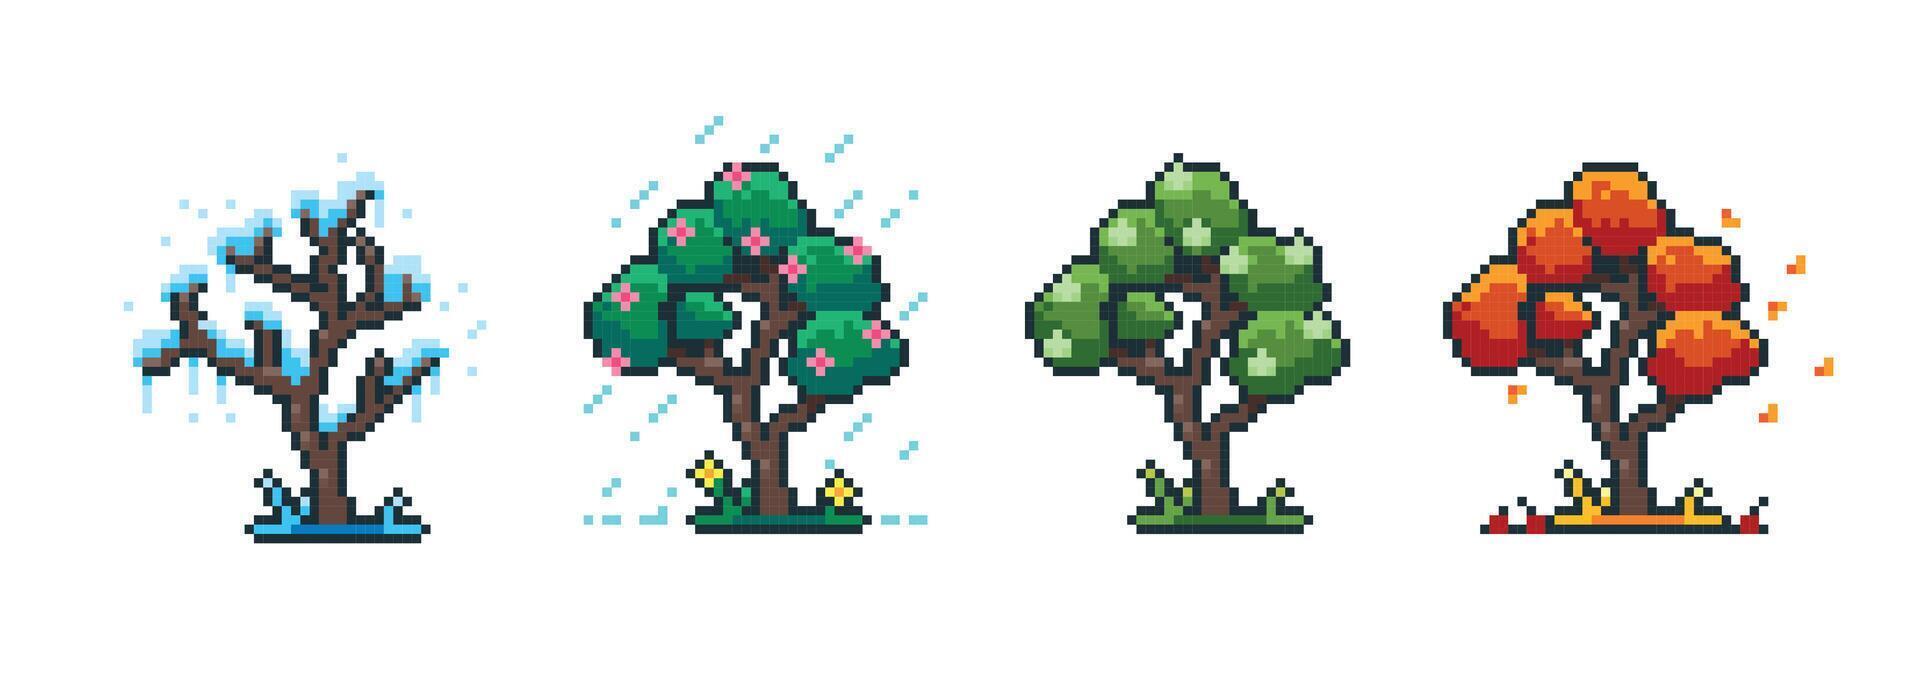 Season pixel tree. 8 bit spring summer autumn and winter cartoon tree for retro video game. Vector green and white garden plant